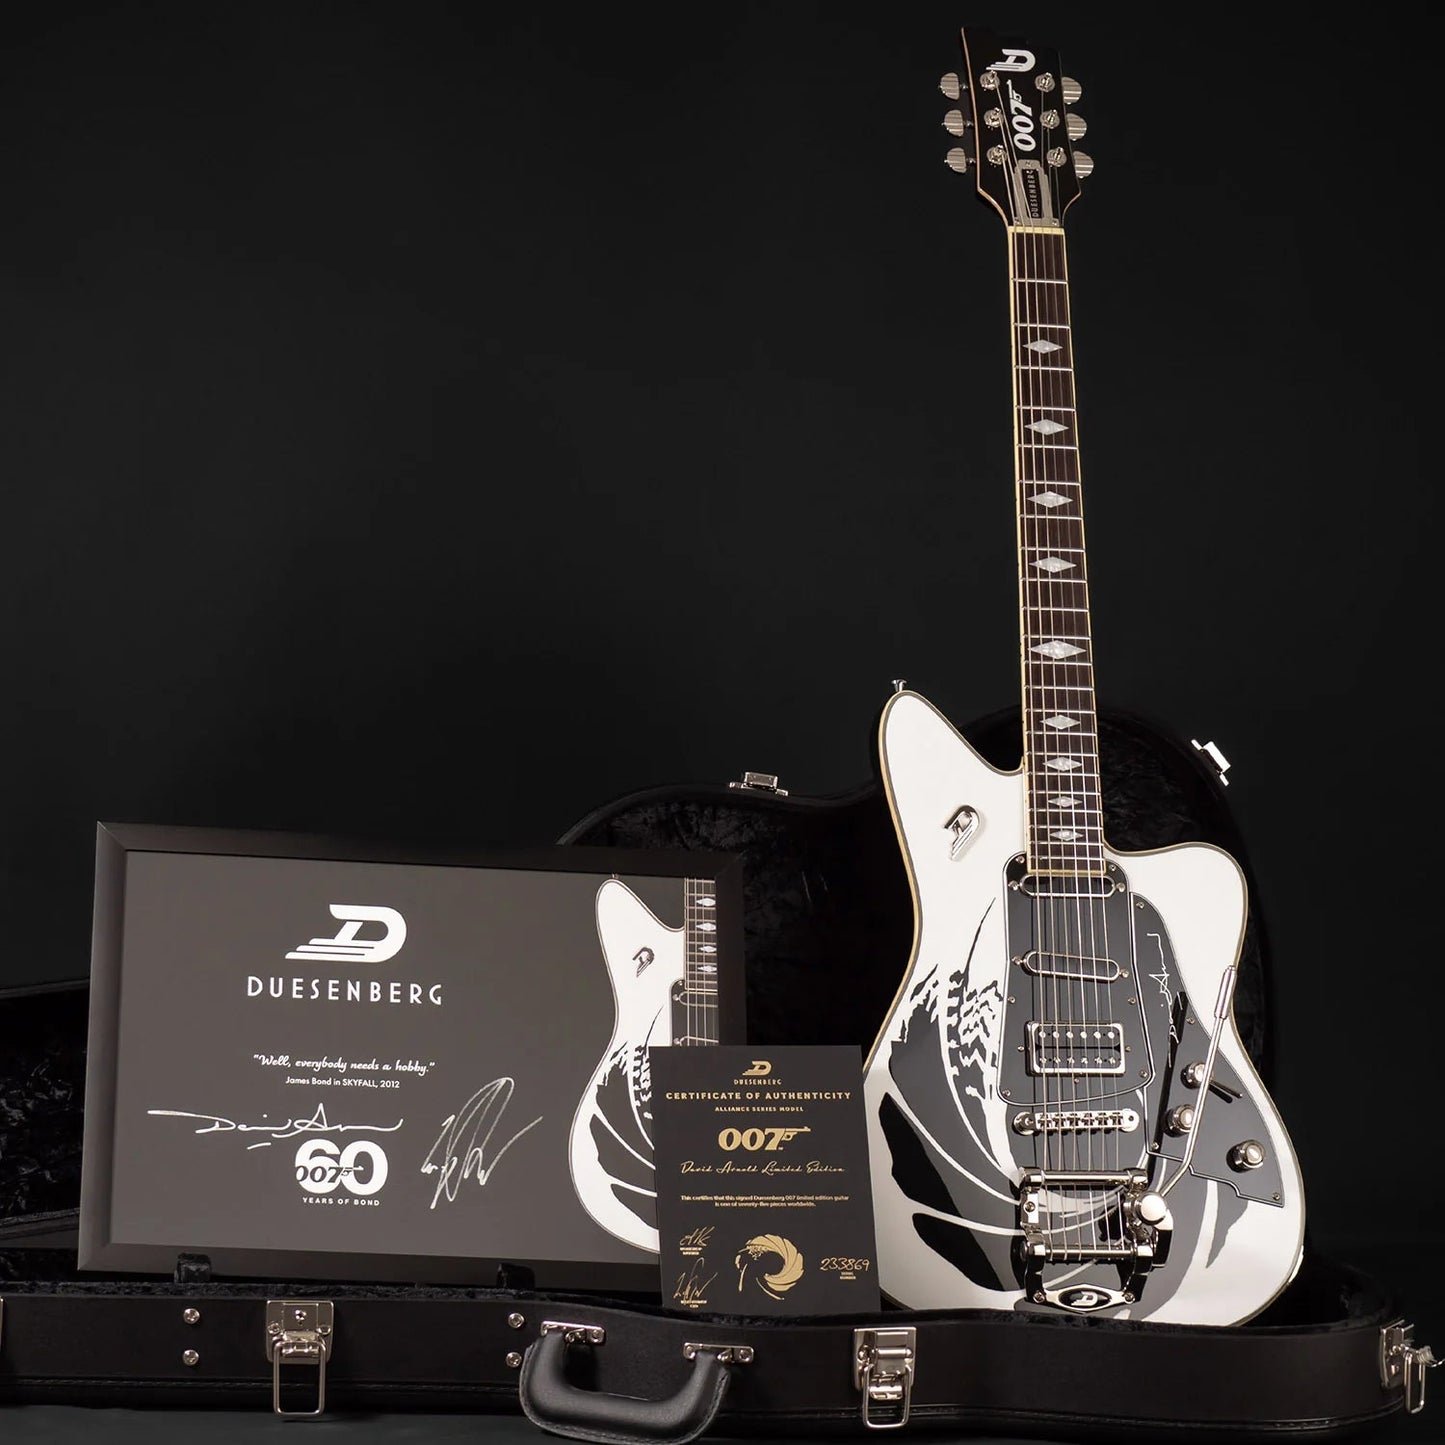 All of the case candy included with the Duesenberg Alliance Series James Bond 007 Alliance Electric Guitar. Case, framed and autographed picture, COA, picks and guitar.